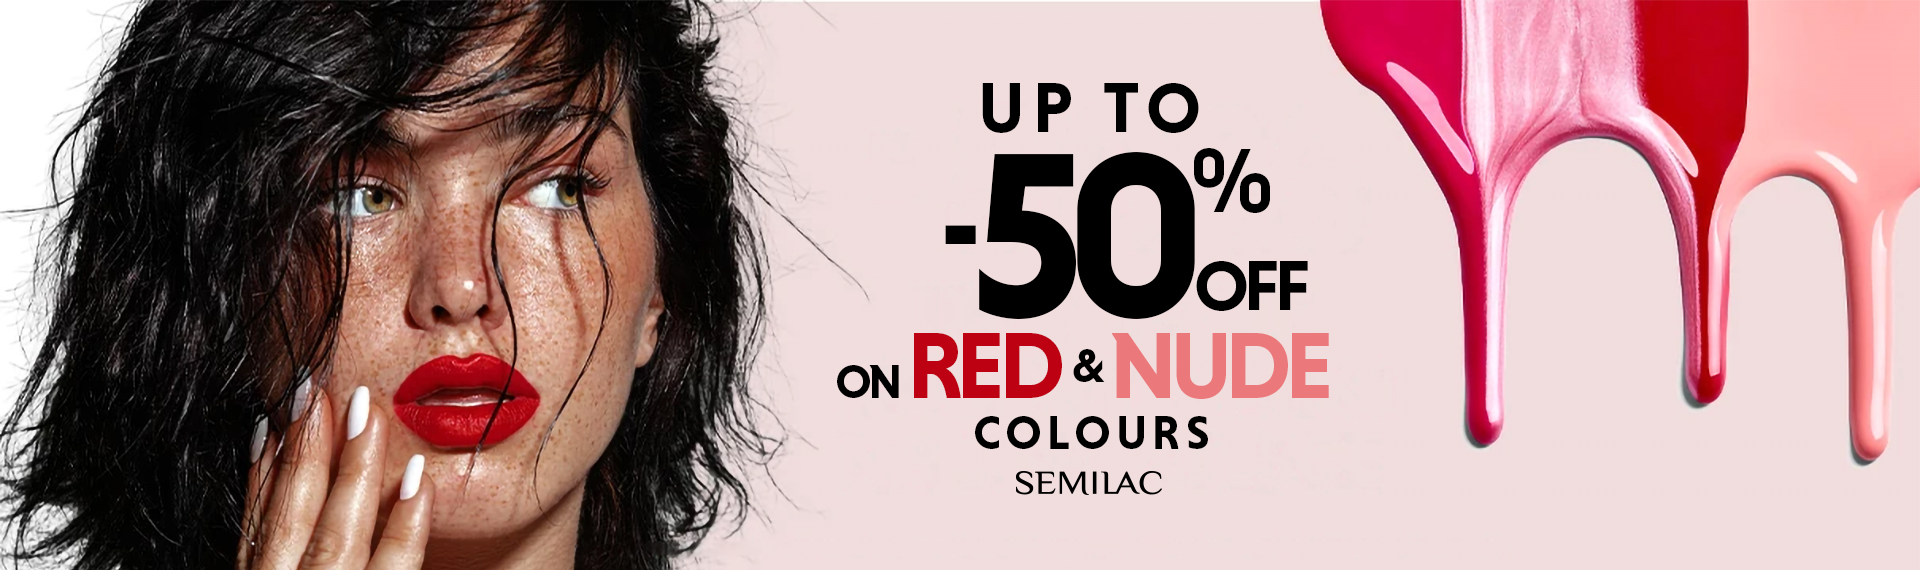 UP TO -50% OFF ON RED & NUDE COLOURS